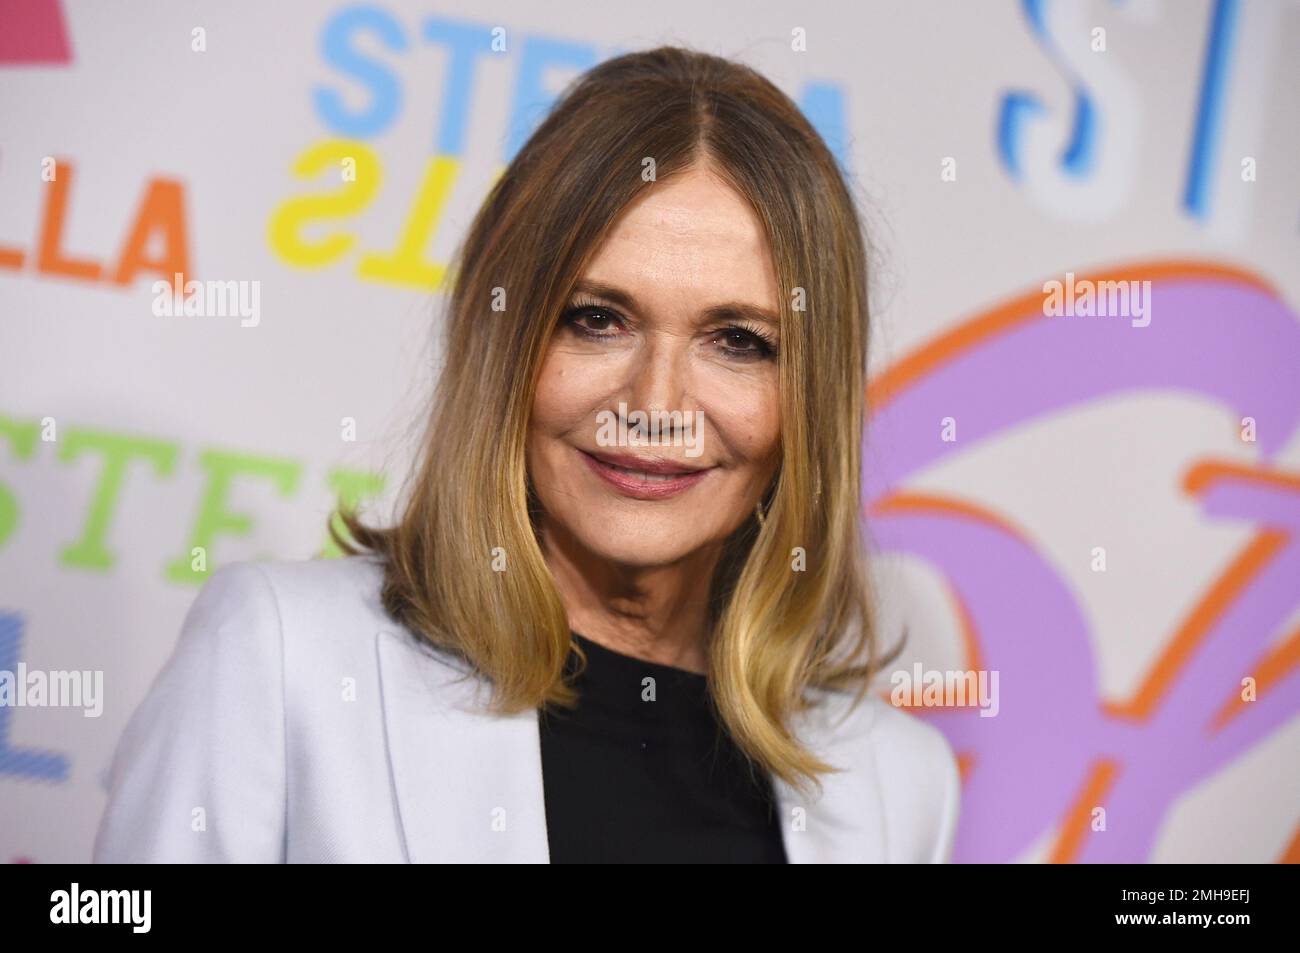 Actress Peggy Lipton arrives at the Stella McCartney Autumn 2018  Presentation in Los Angeles on Jan. 16, 2018. Lipton, a star of the  groundbreaking late 1960s TV show The Mod Squad and